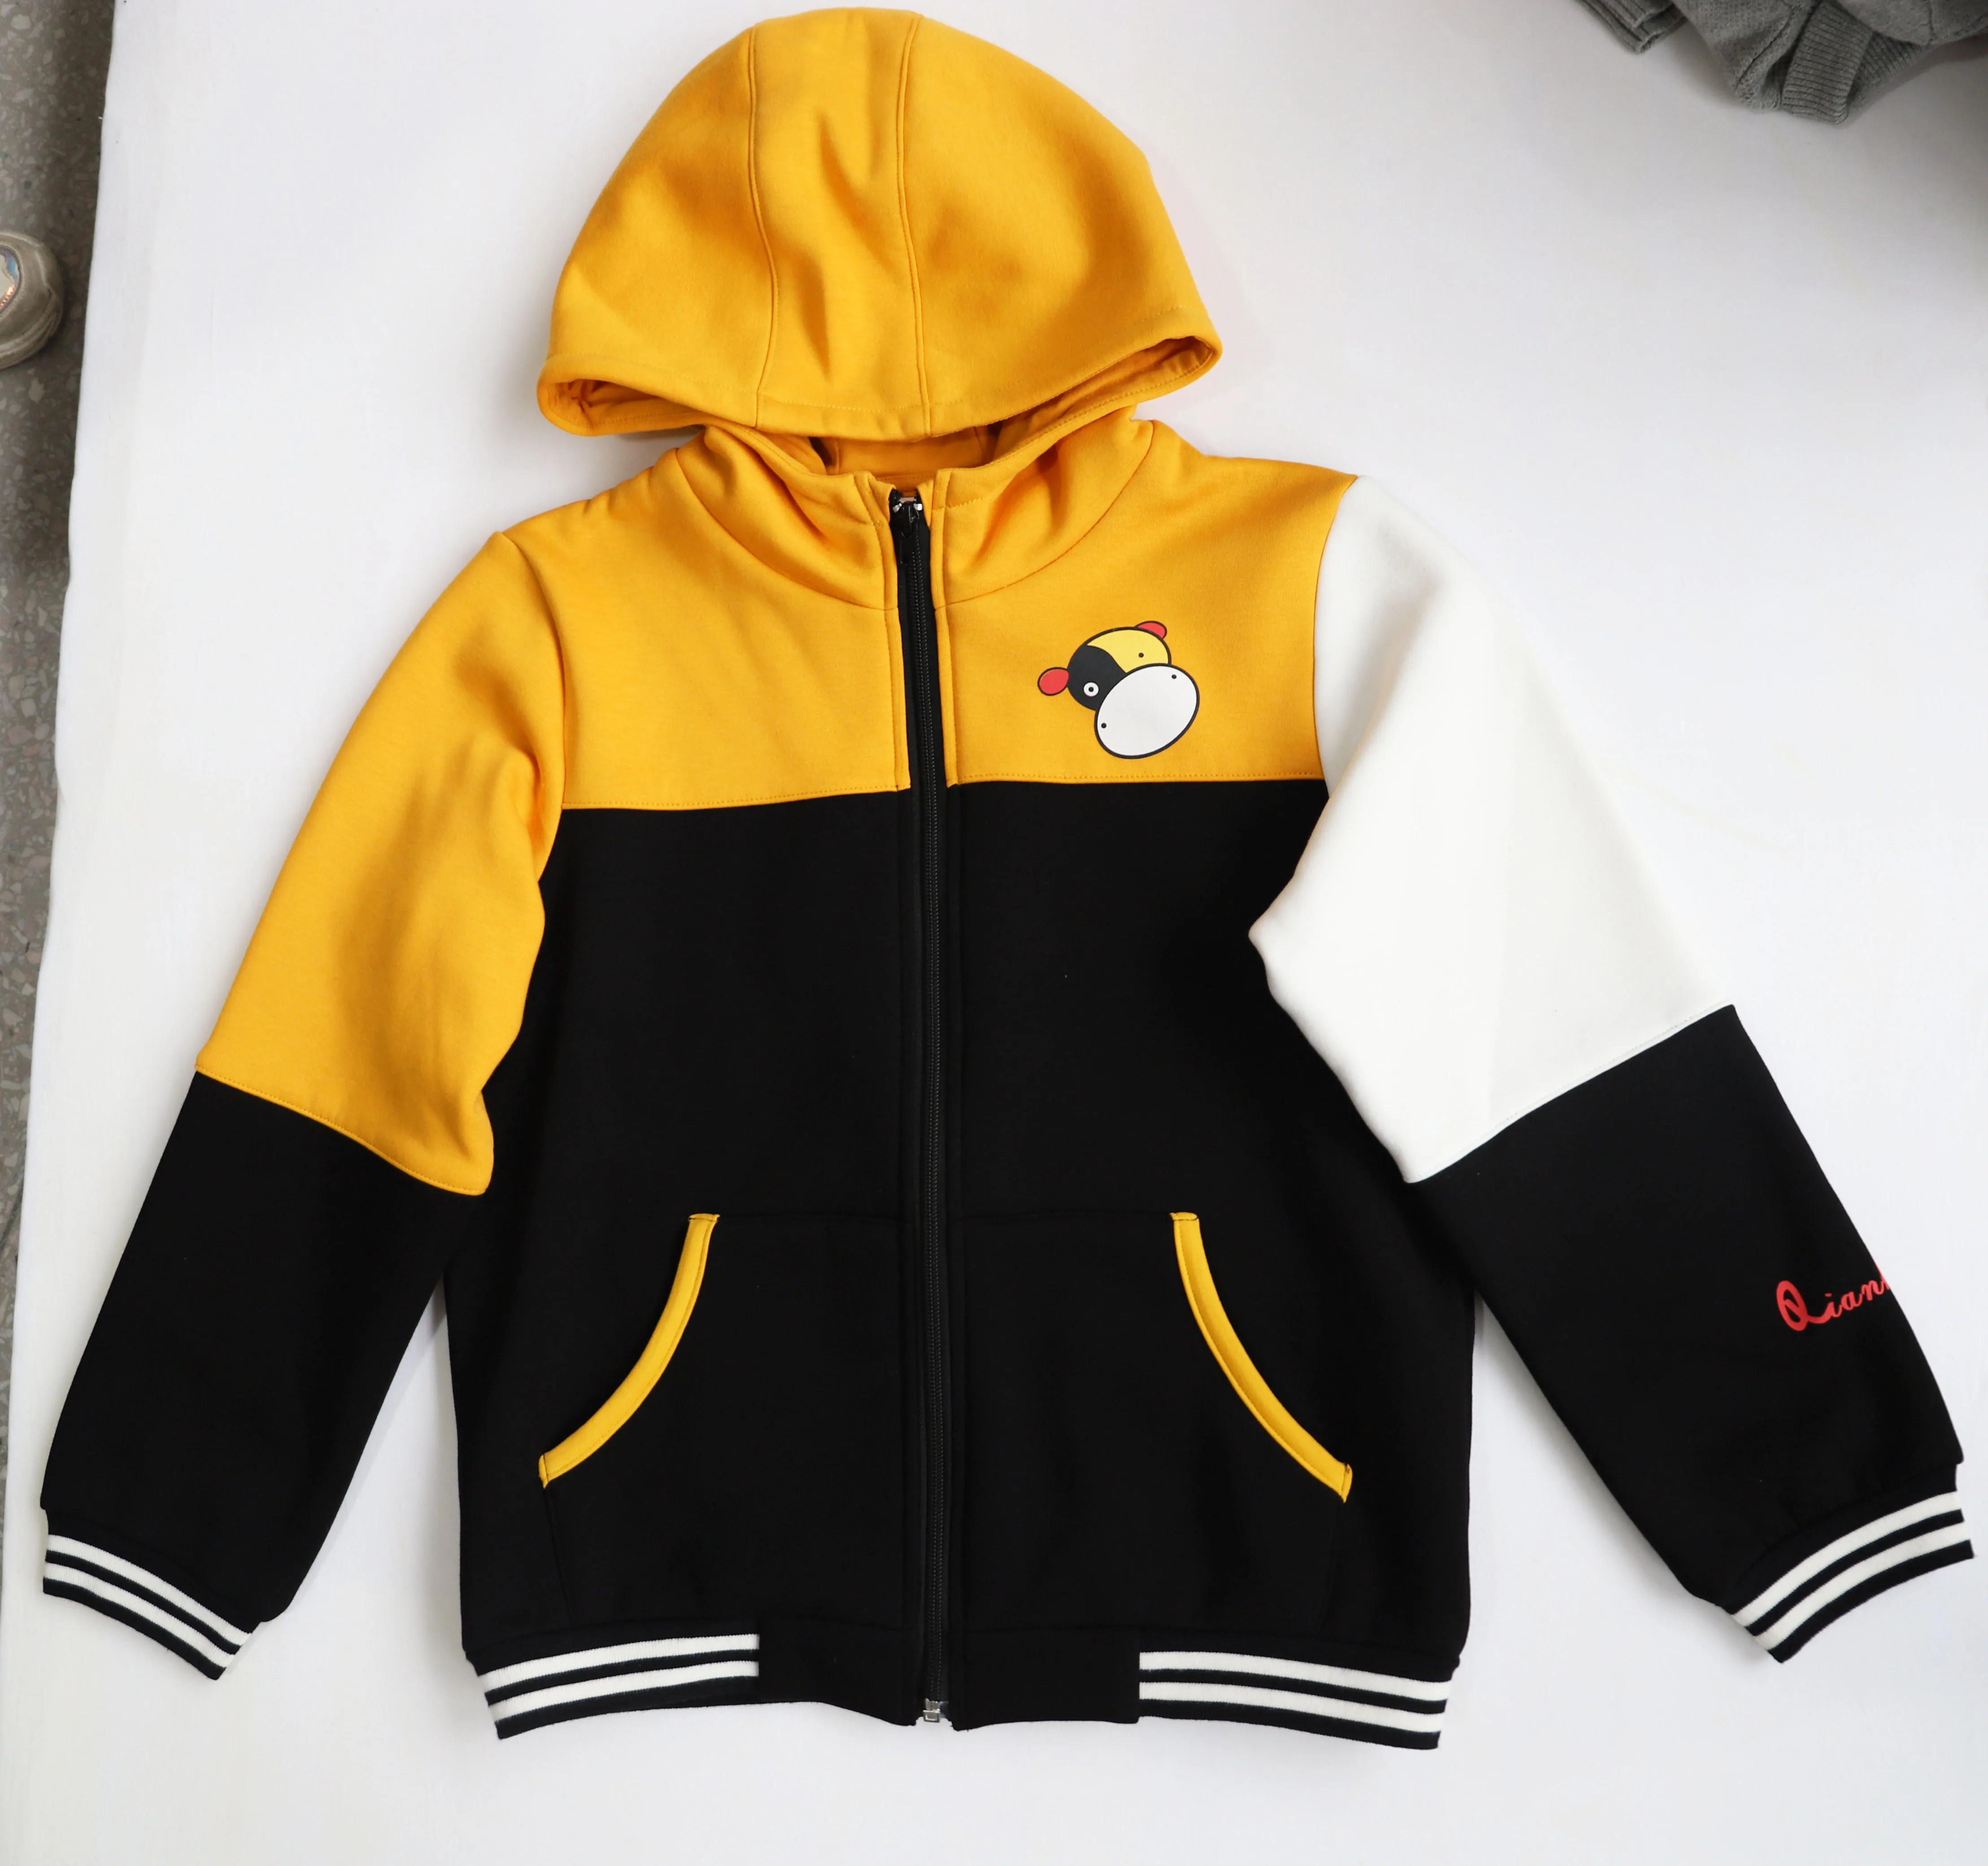 
Winter Thick fleece Hoodies Tops and Pants Two Piece Set children Tracksuit Crop Top Trousers Casual t 